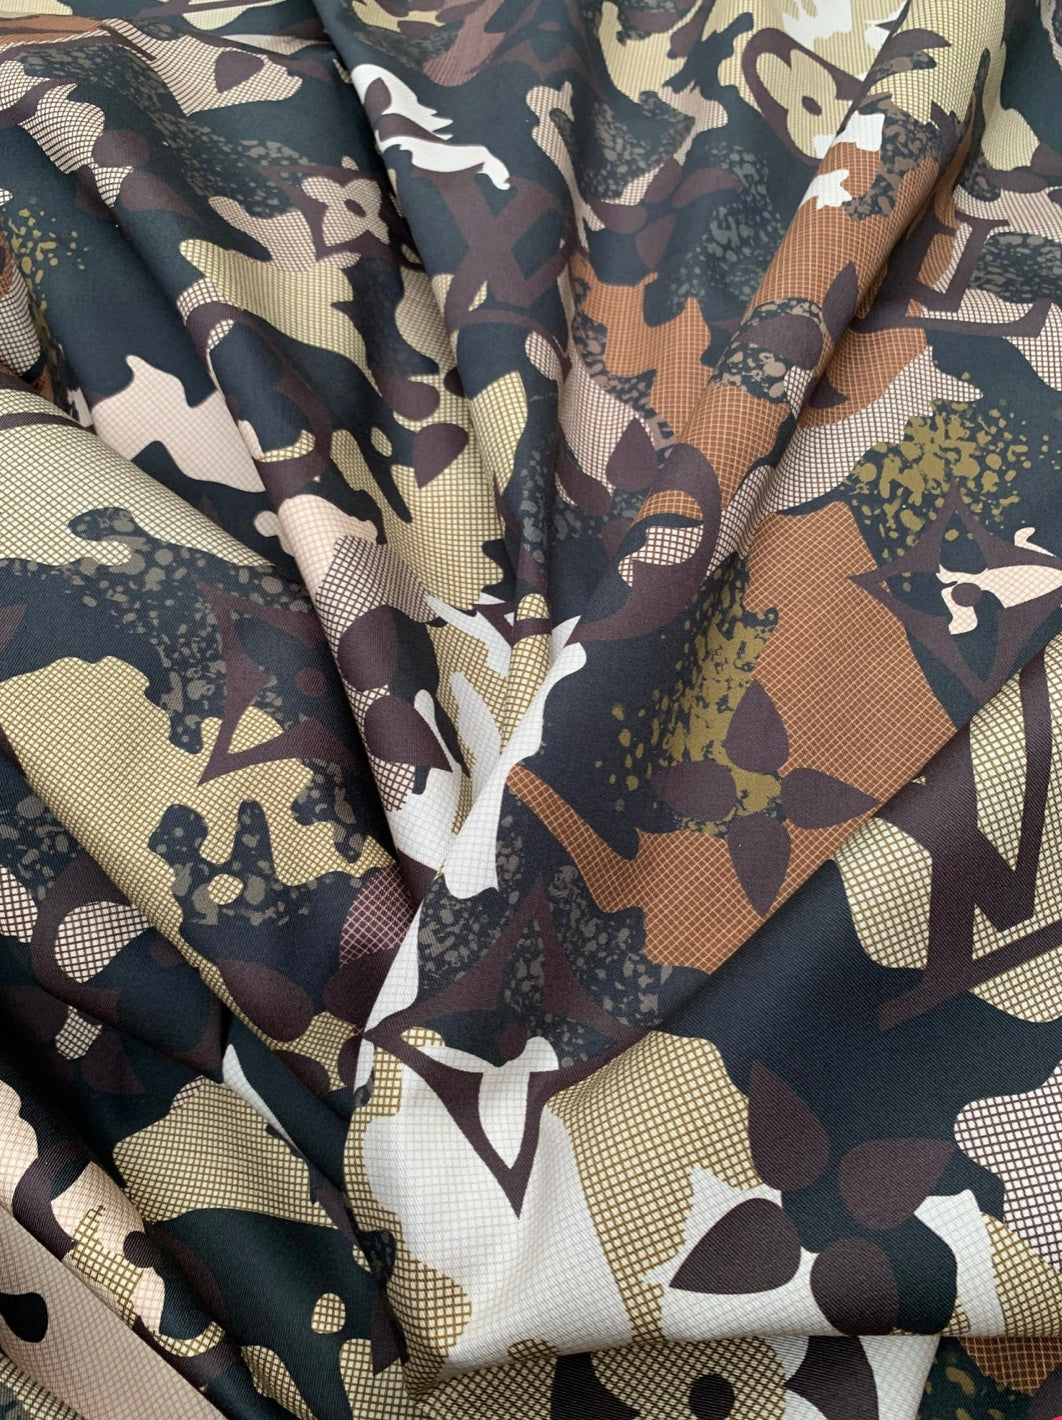 Desert Camouflage Lv Cotton Fabric for Custom Clothing DIY Crafts ...